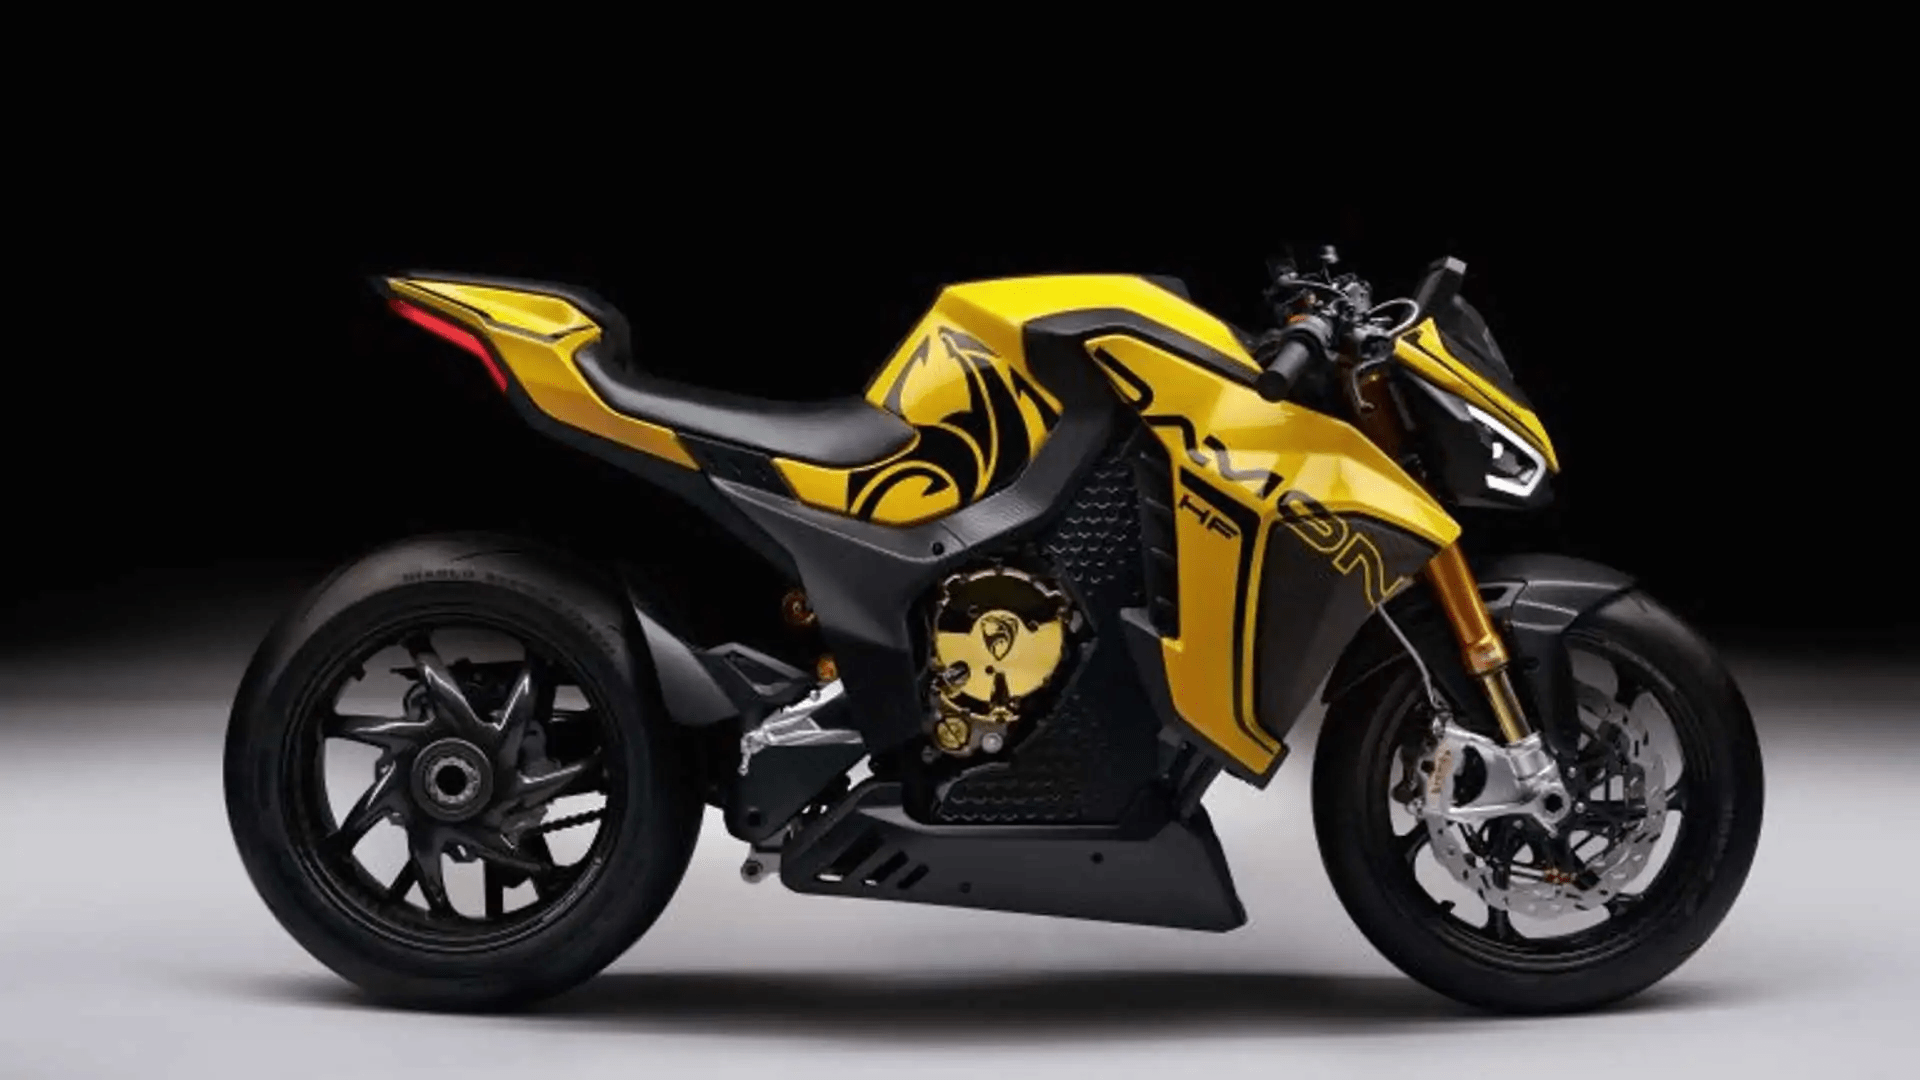 [Street] Damon Motorcycles unveils the HyperFighter at CES in Las Vegas